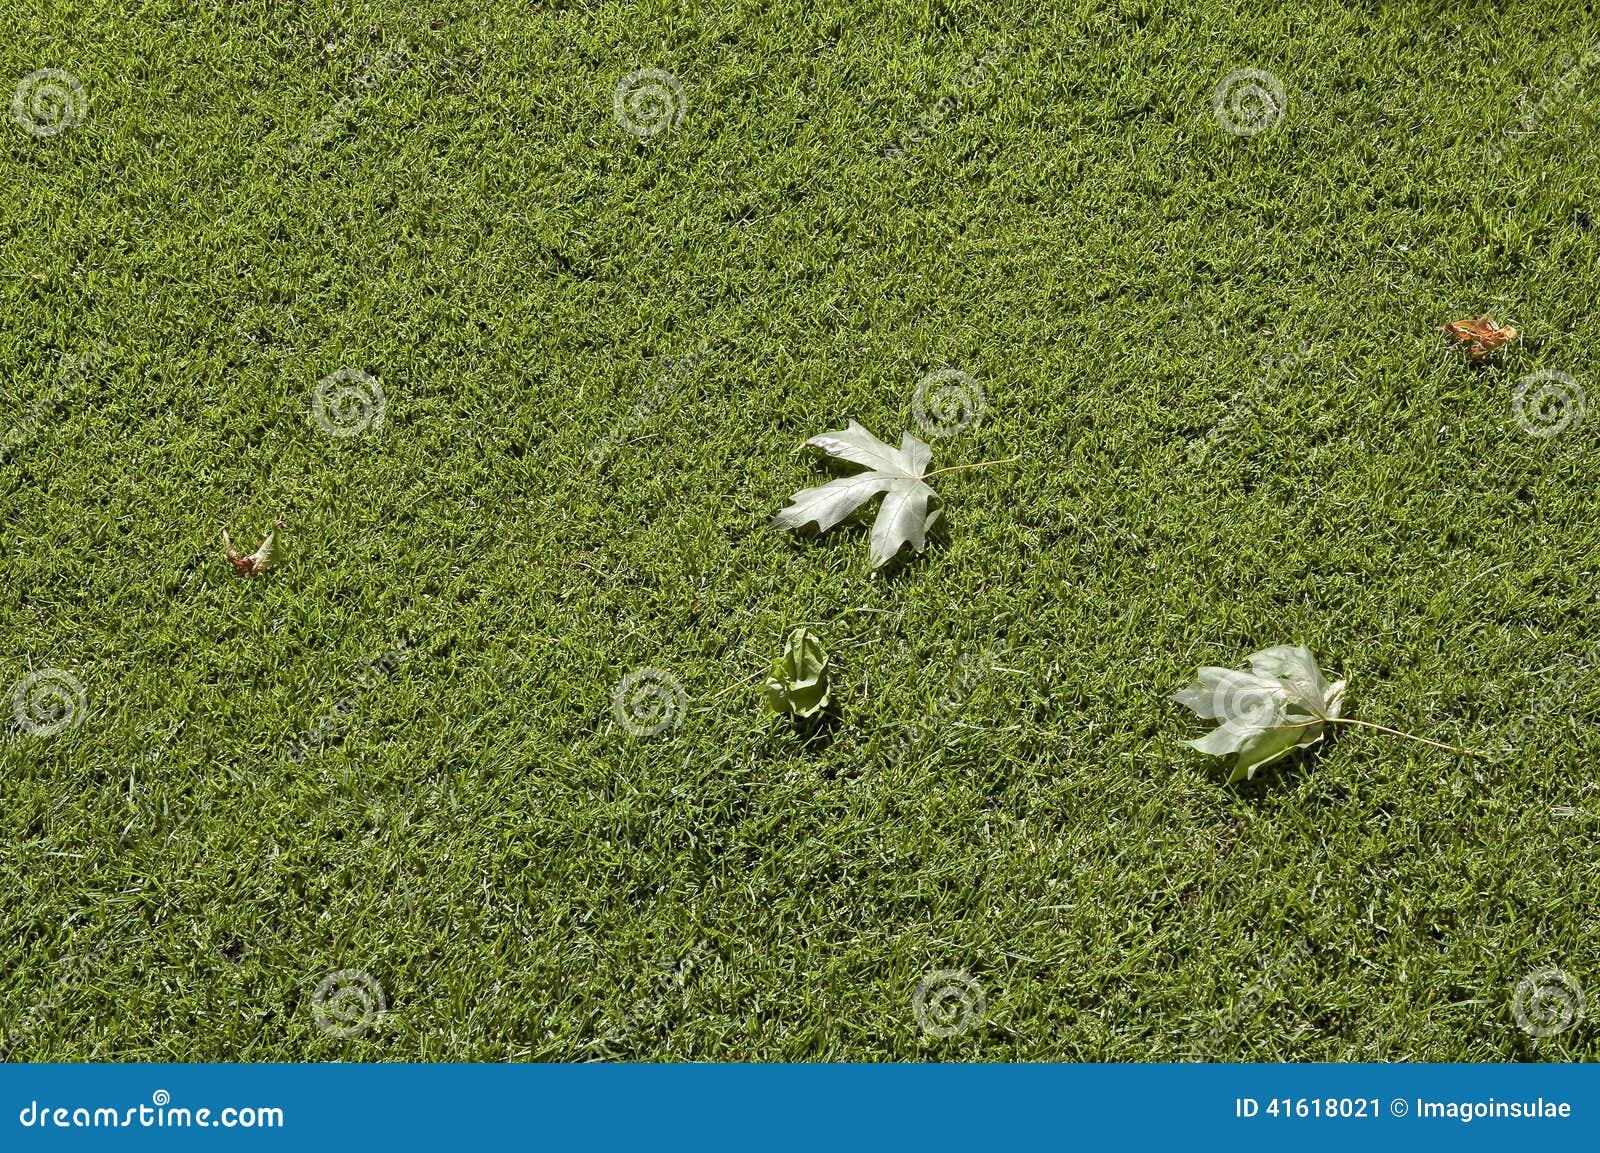 leaves on green lawn